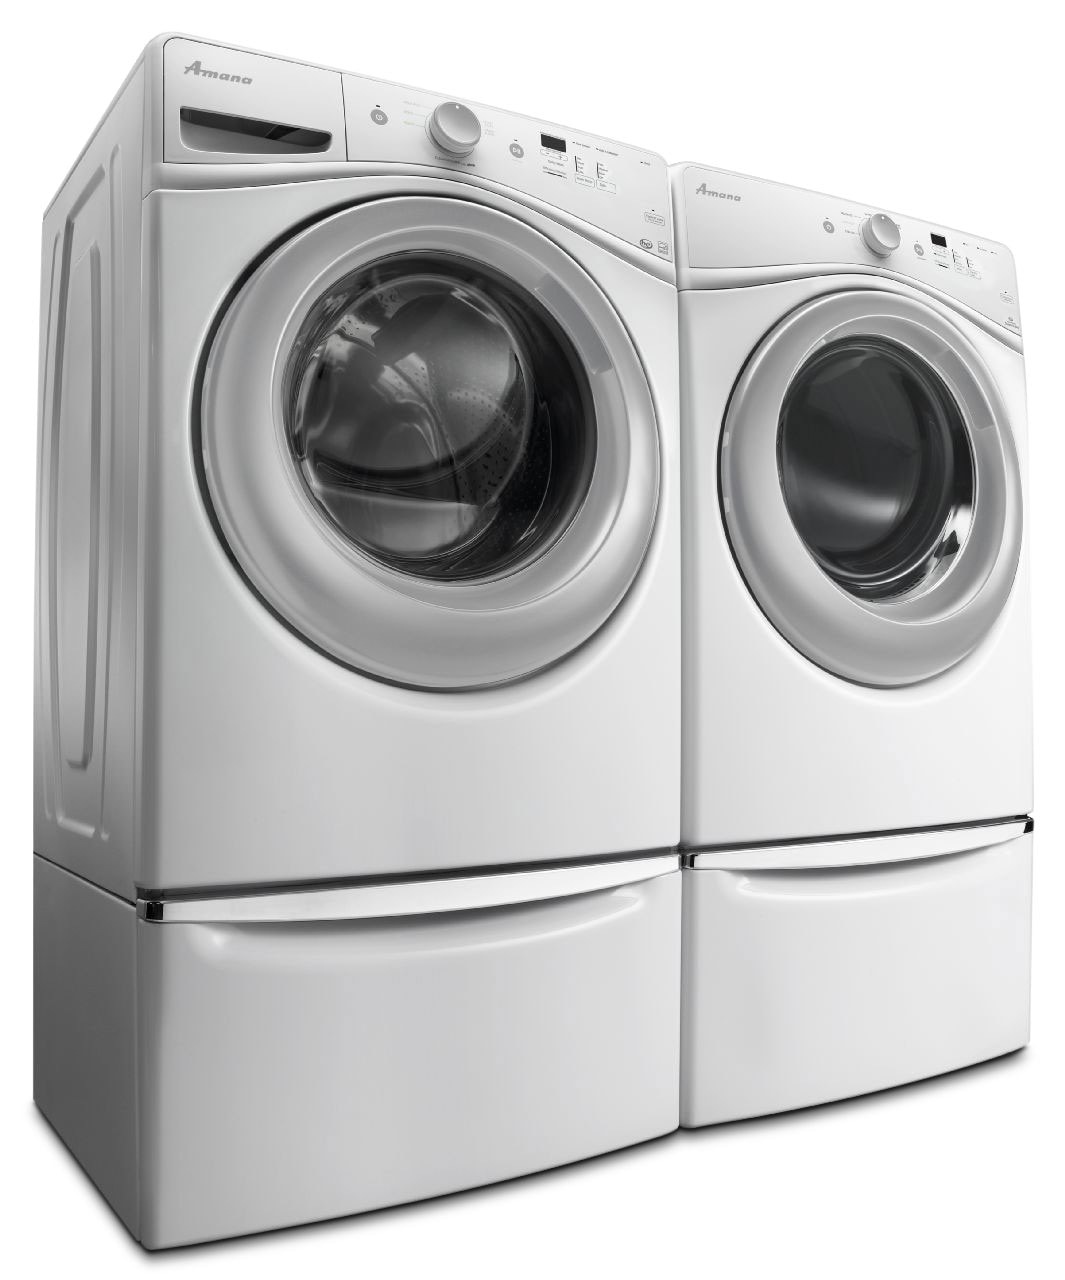 Amana 4.8 Cu. Ft. Front Load Washer and 7.4 Cu. Ft. Electric Dryer